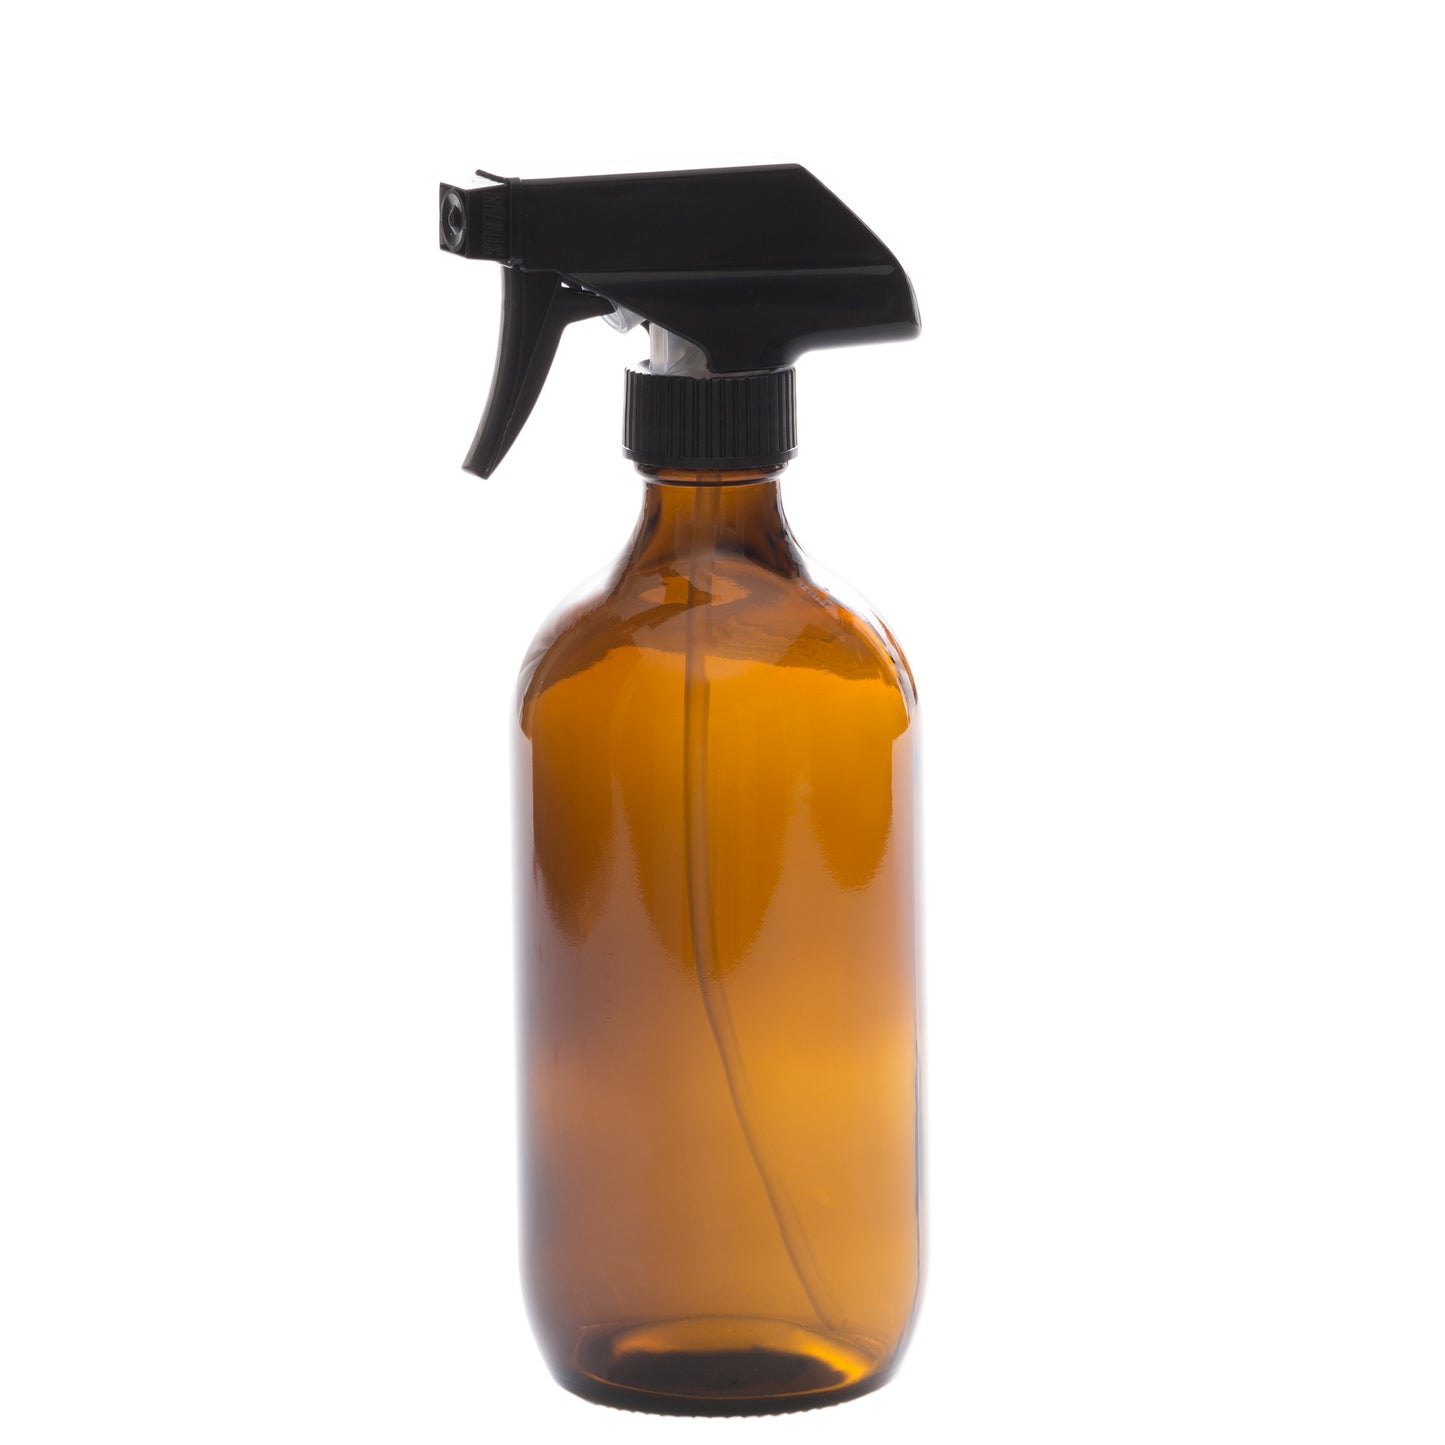 Large 32oz Amber Glass Spray Bottles with Funnel - Refillable Trigger  Sprayer Containers for Oils, Cleaning Products, Plant Misting, Cooking,  Hair